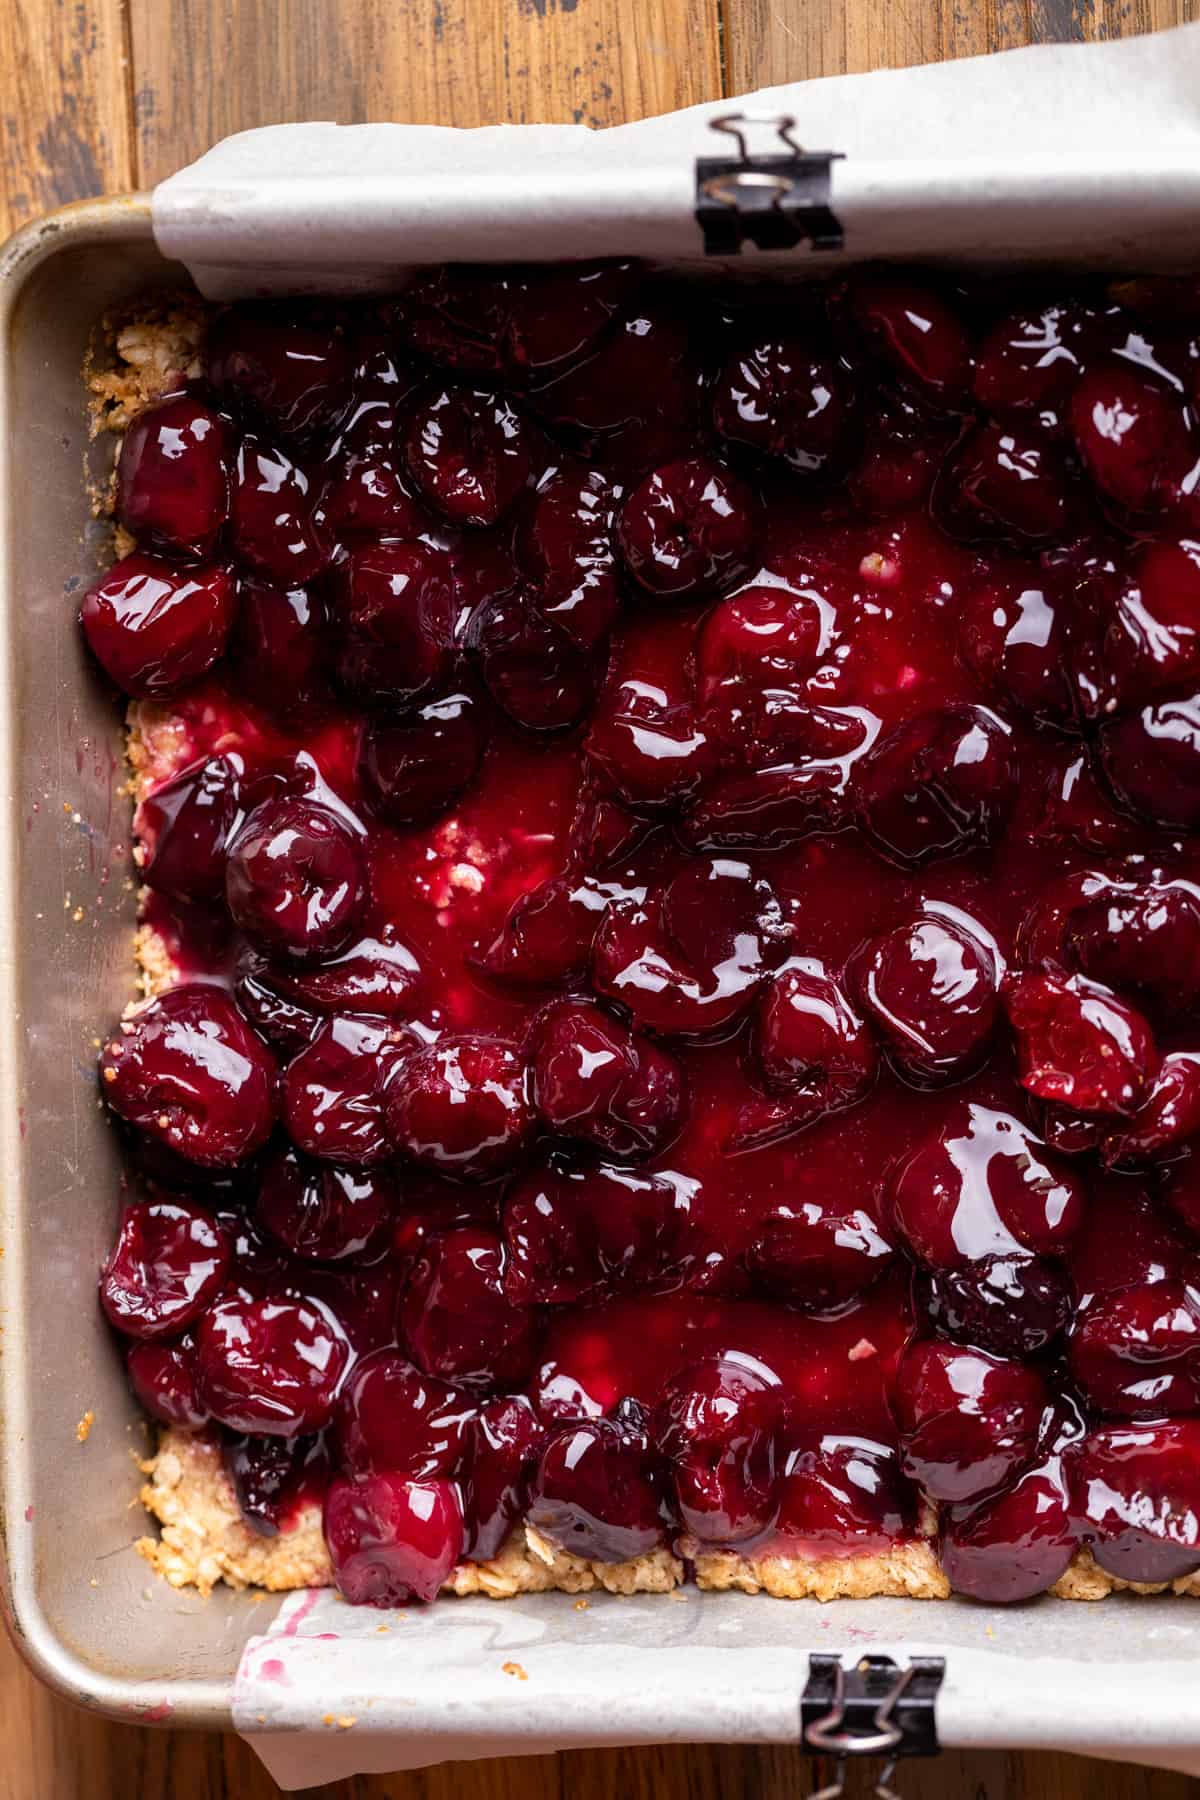 Cherry filling in the pan.